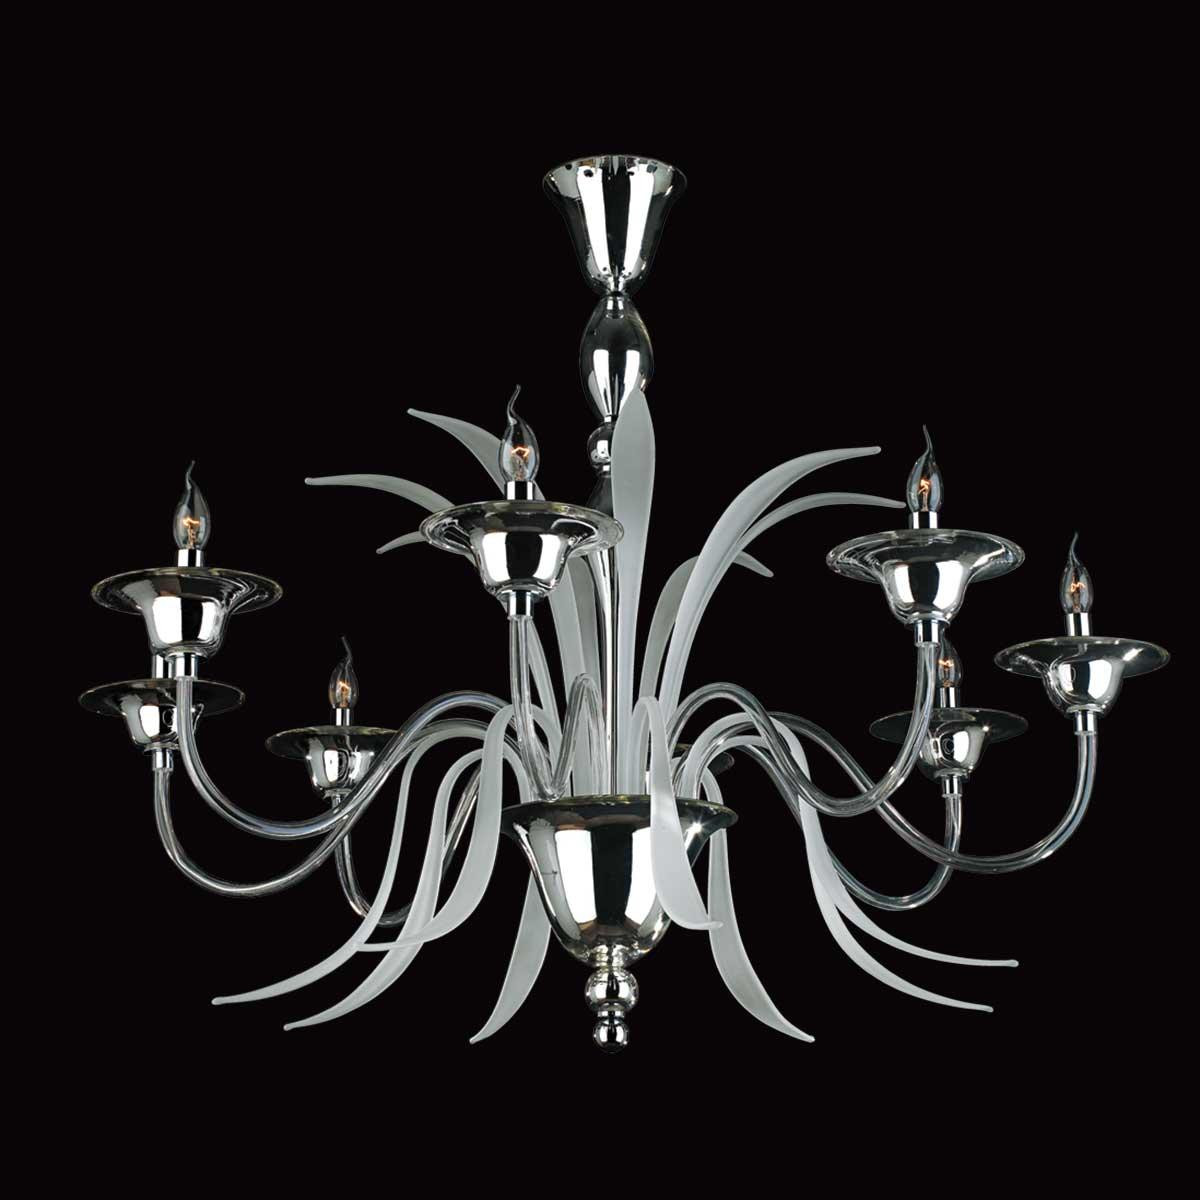 "Euripide" Murano glass chandelier - 8 lights - transparent and silver